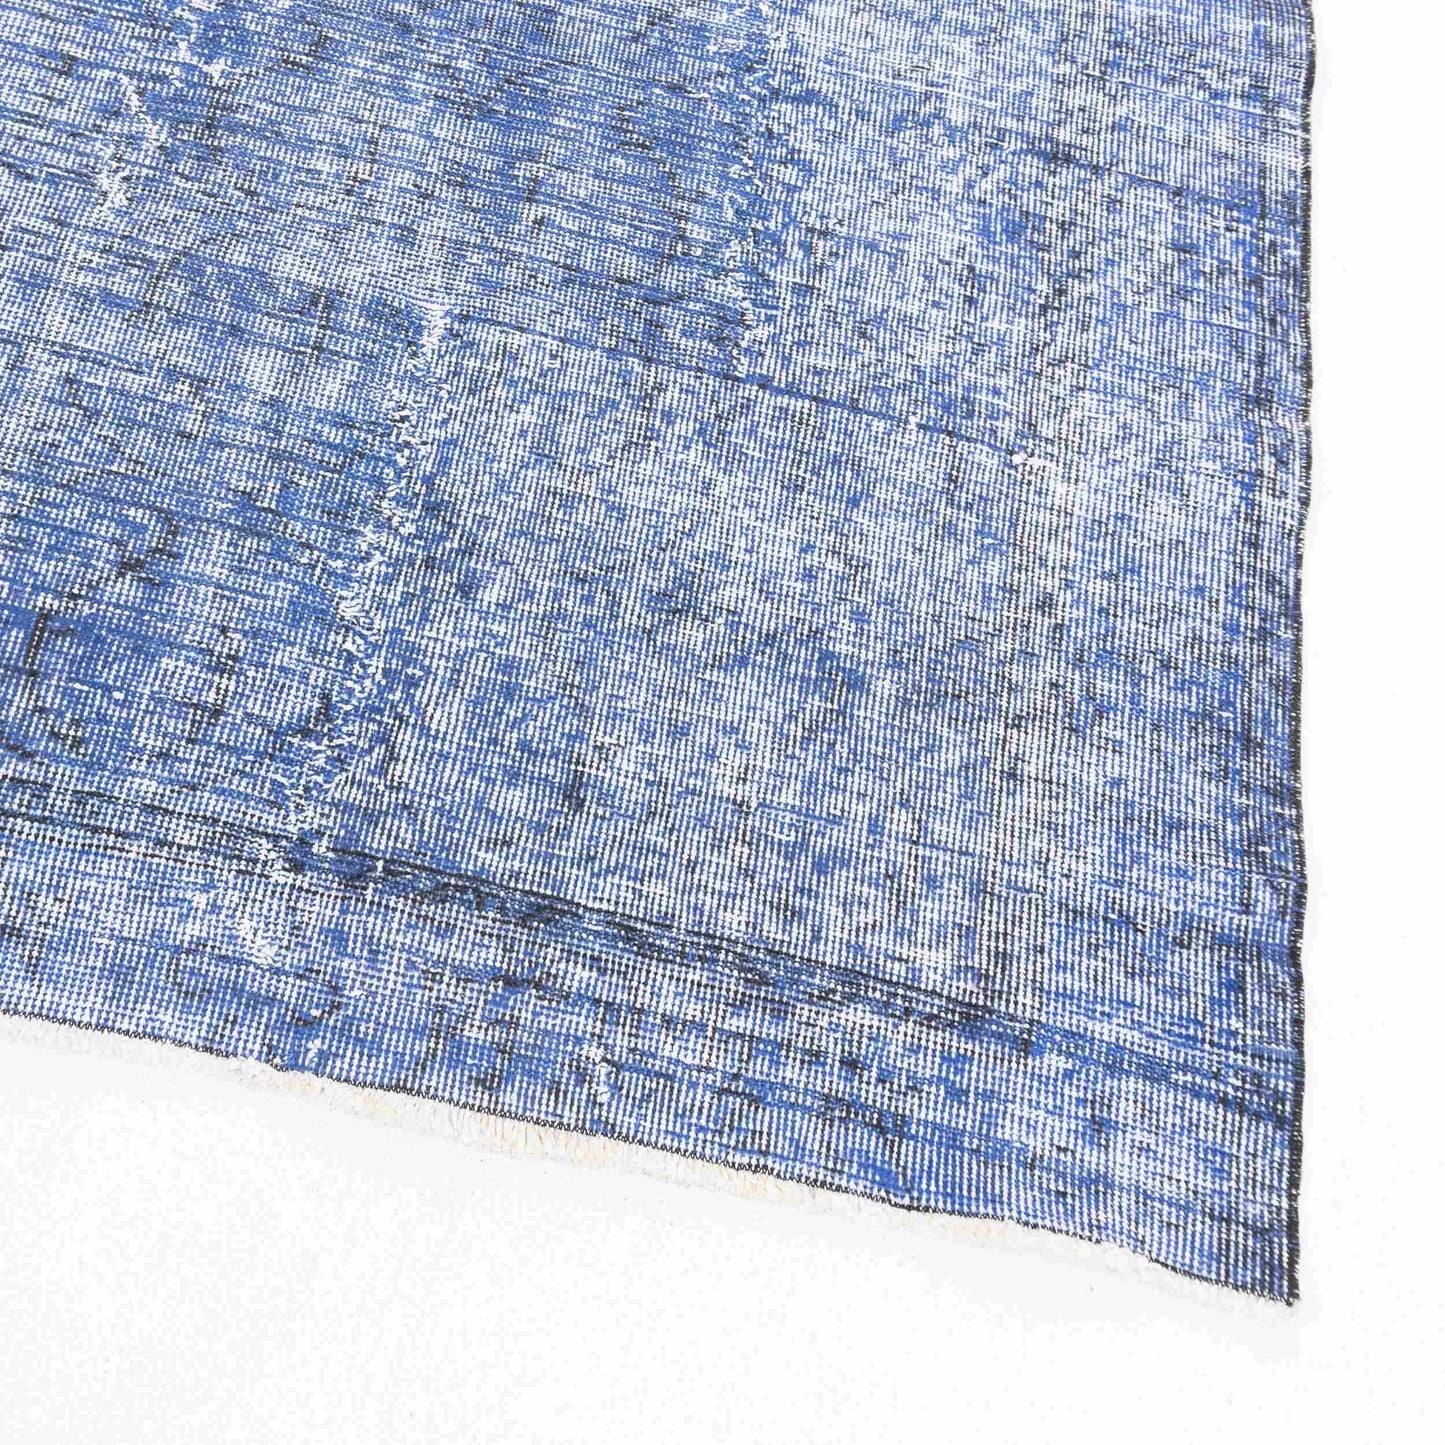 Oriental Rug Vintage Hand Knotted Wool On Cotton 120 x 195 Cm - 4' x 6' 5'' Blue C010 ER01